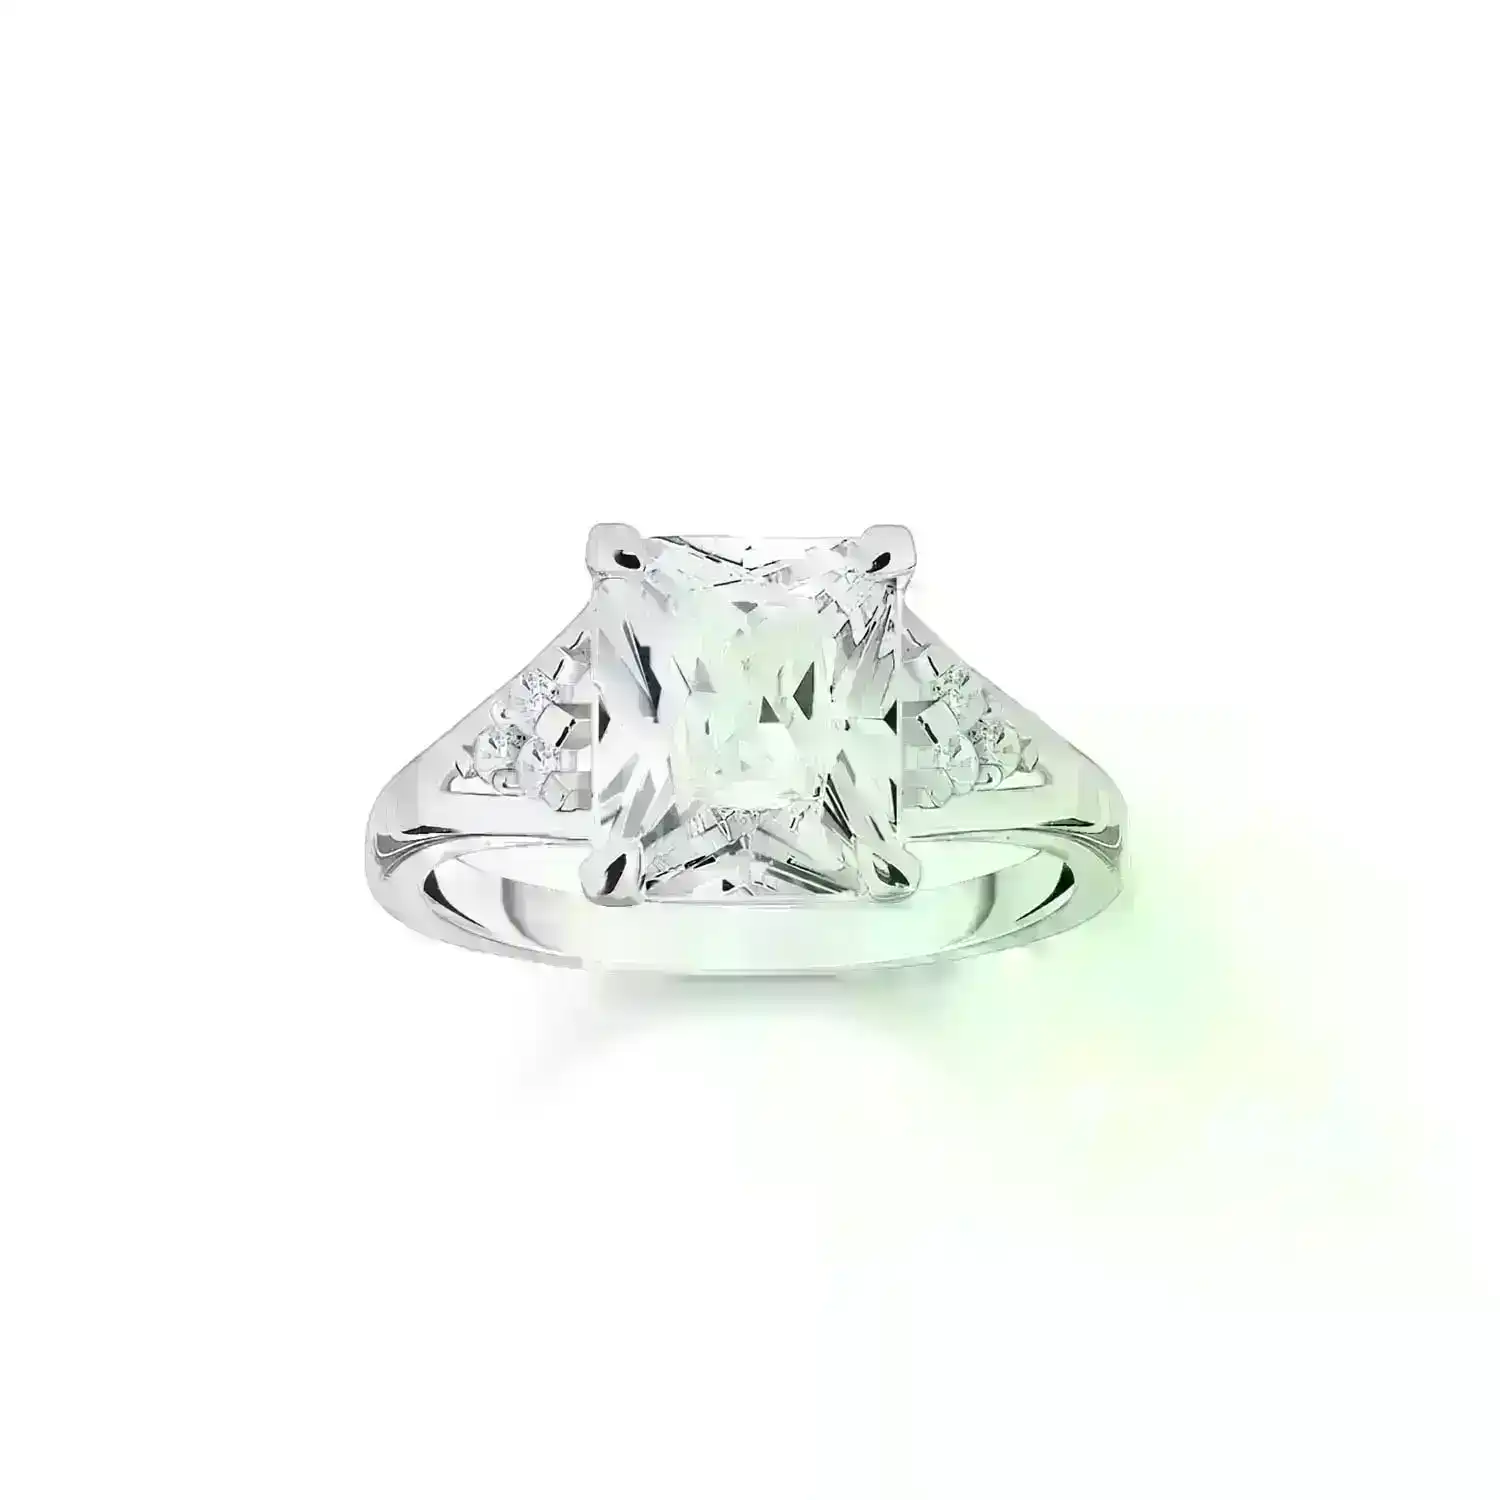 Thomas Sabo Heritage Sterling Silver CZ Cocktail Ring